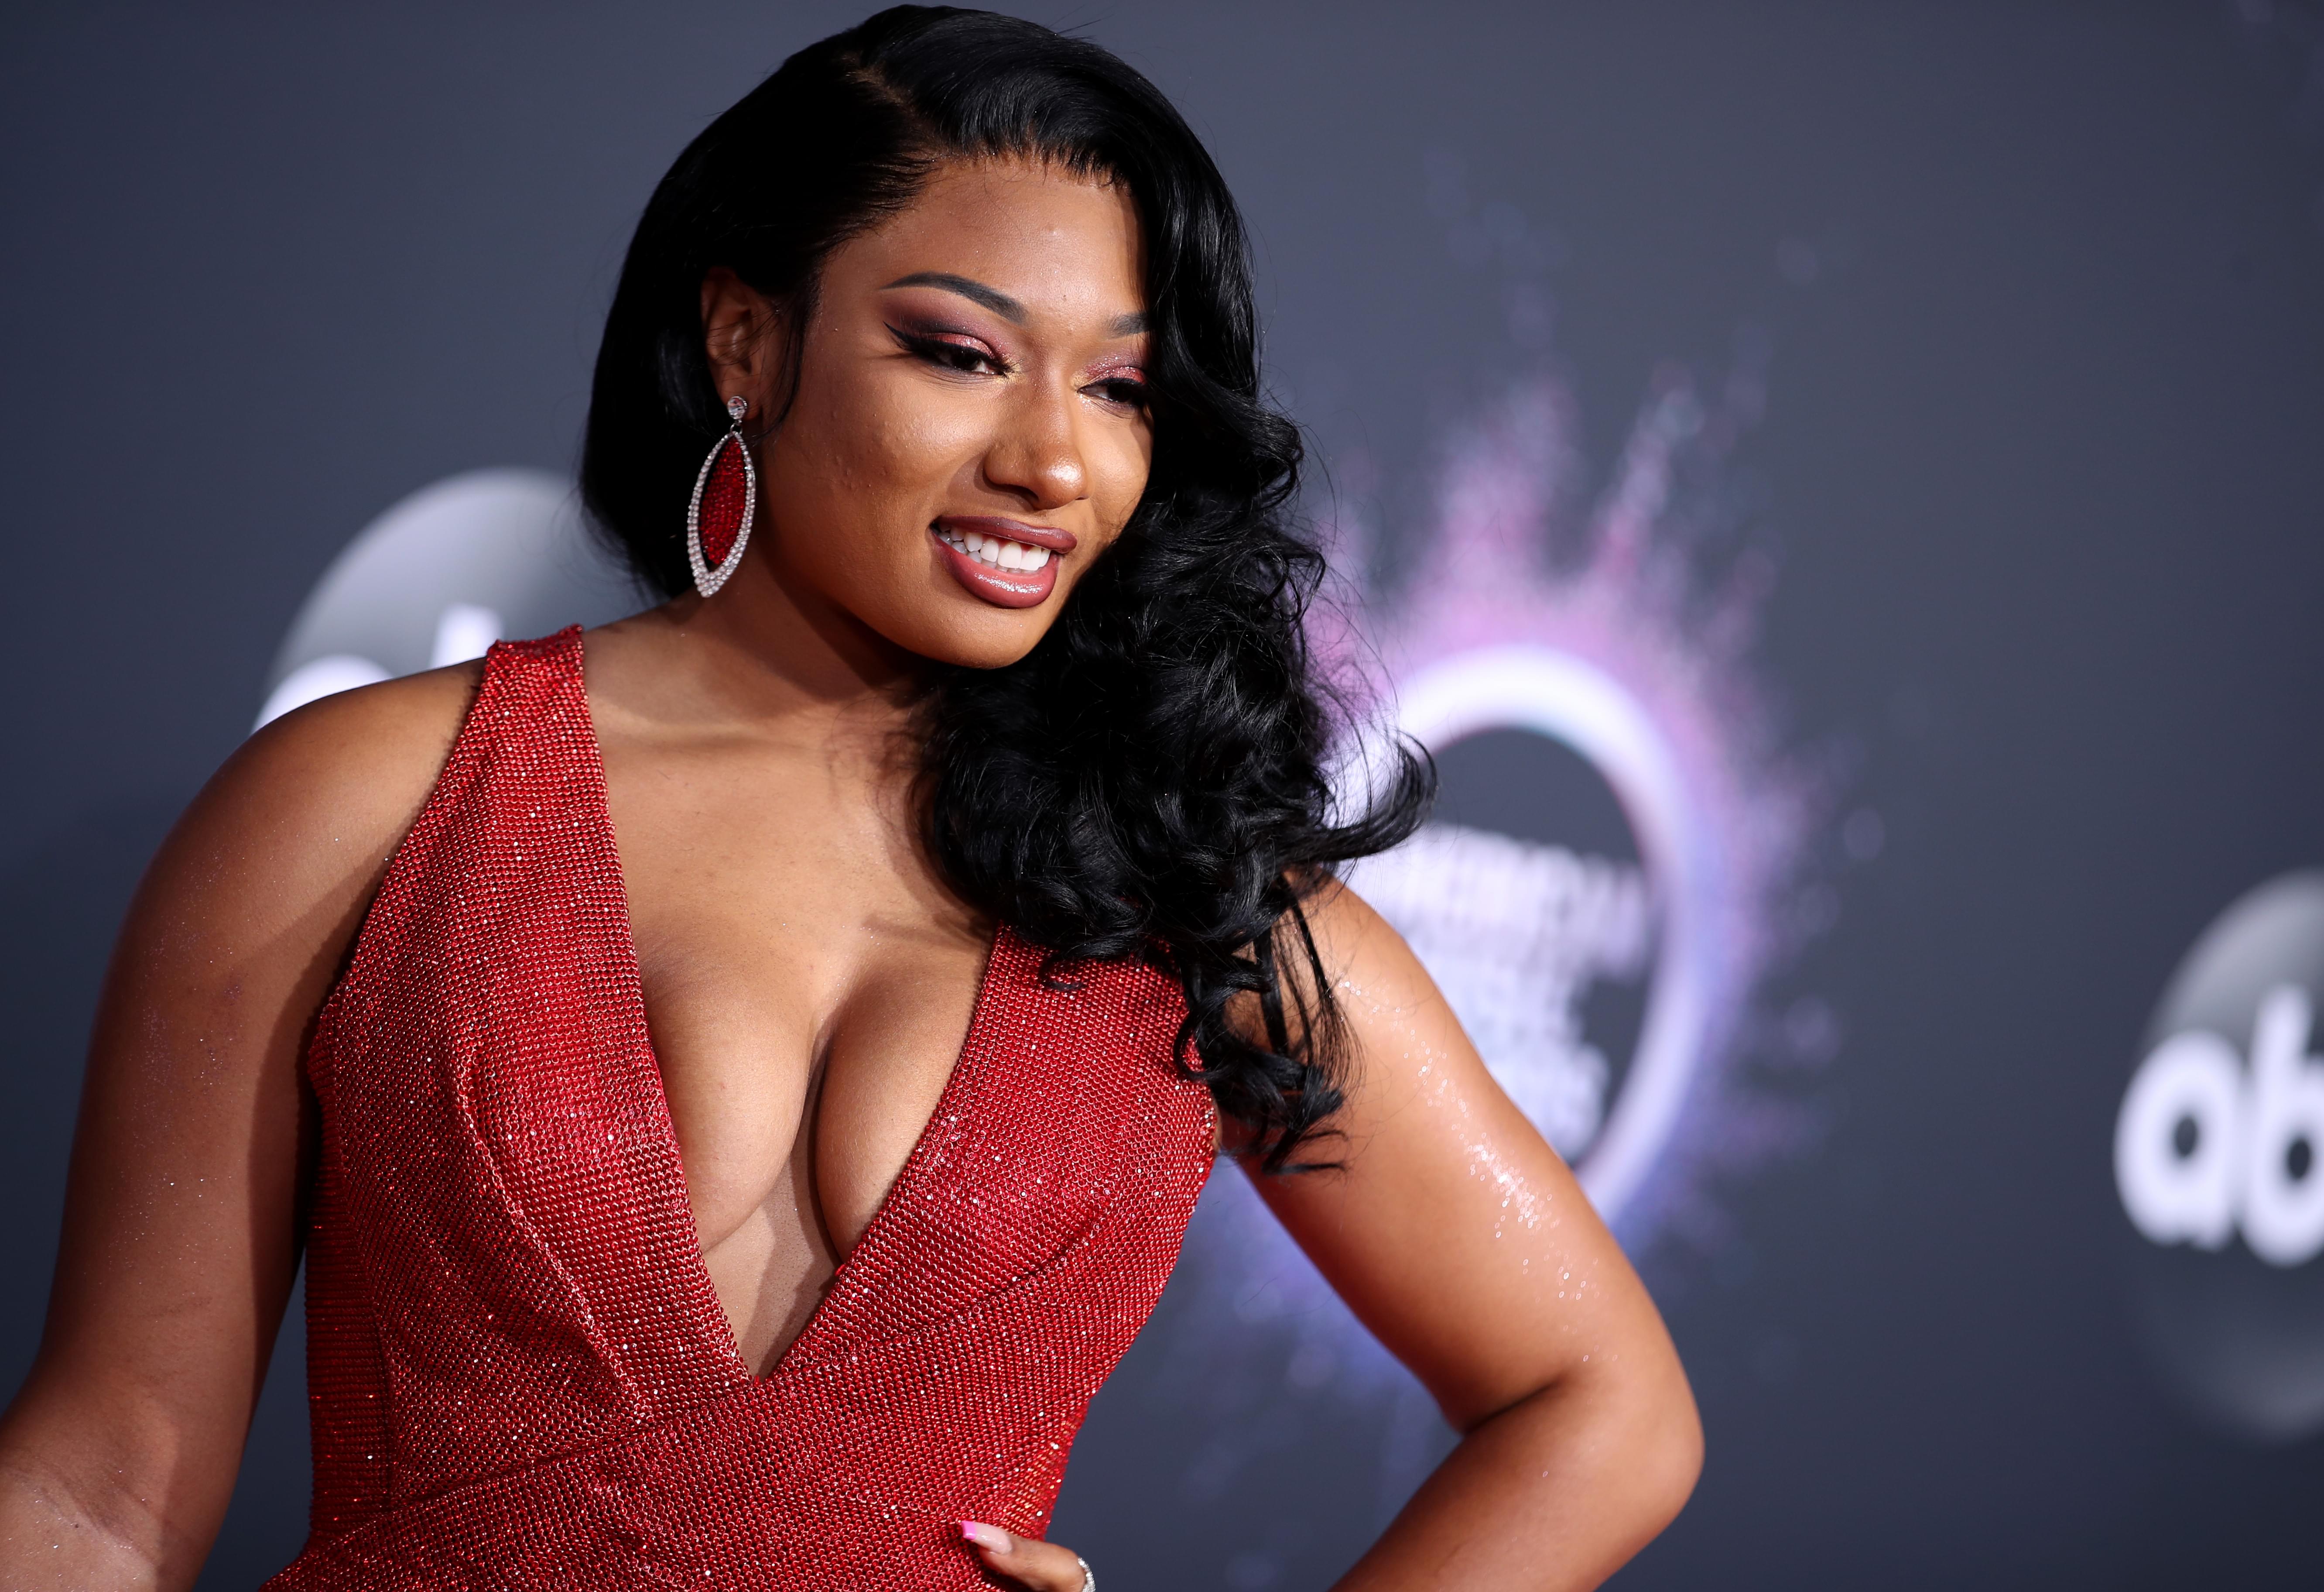 Megan Thee Stallion Will Reportedly Sue Label + Hitmaka Says Her Deal Isn’t Bad But Artists Should Be Better Educated